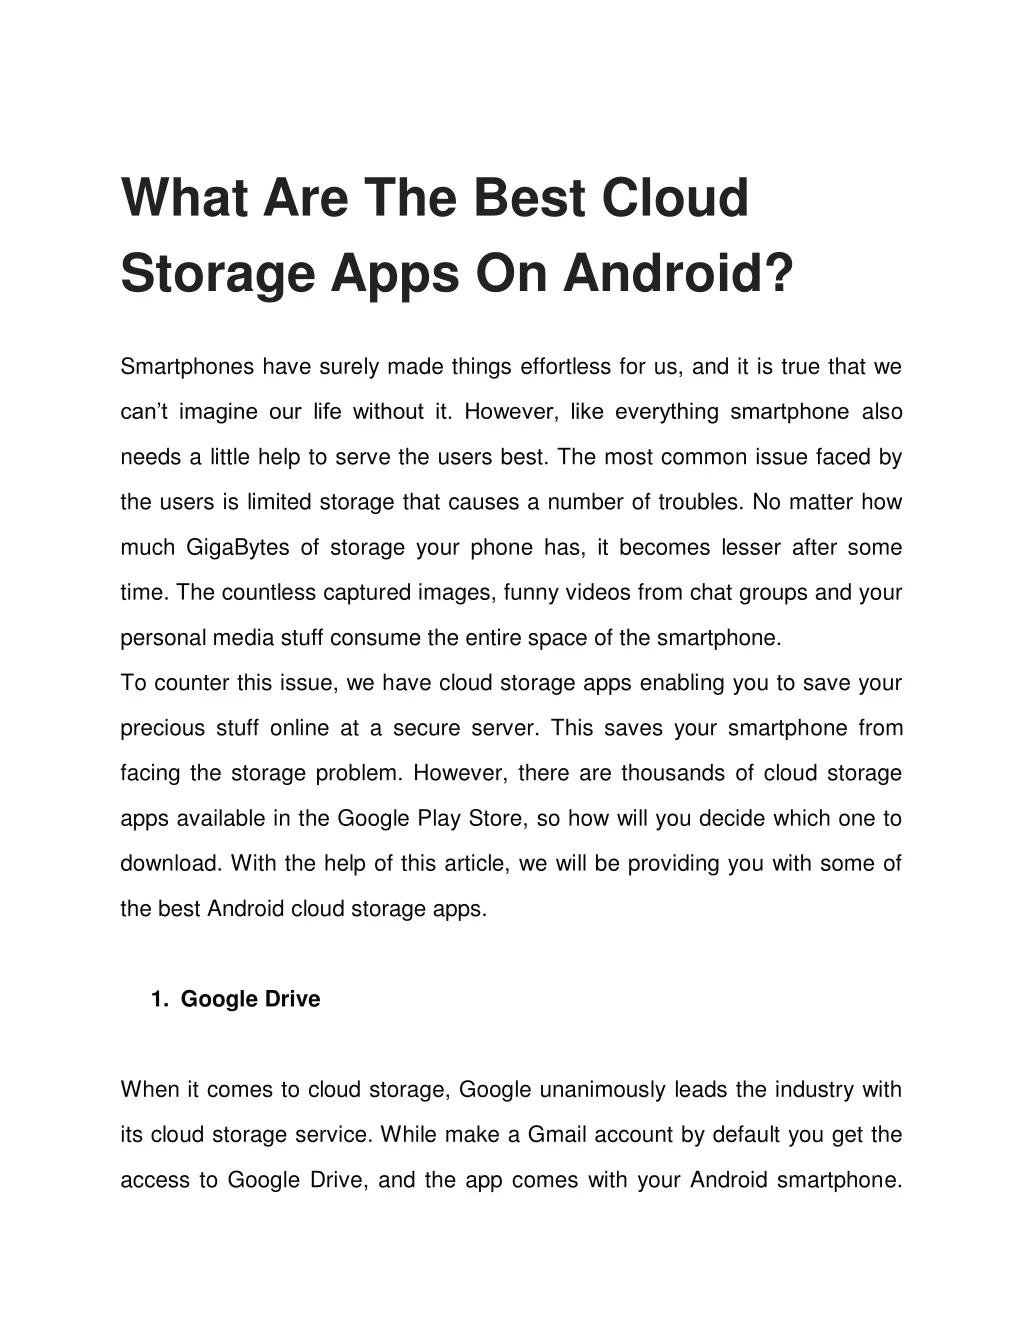 what are the best cloud storage apps on android